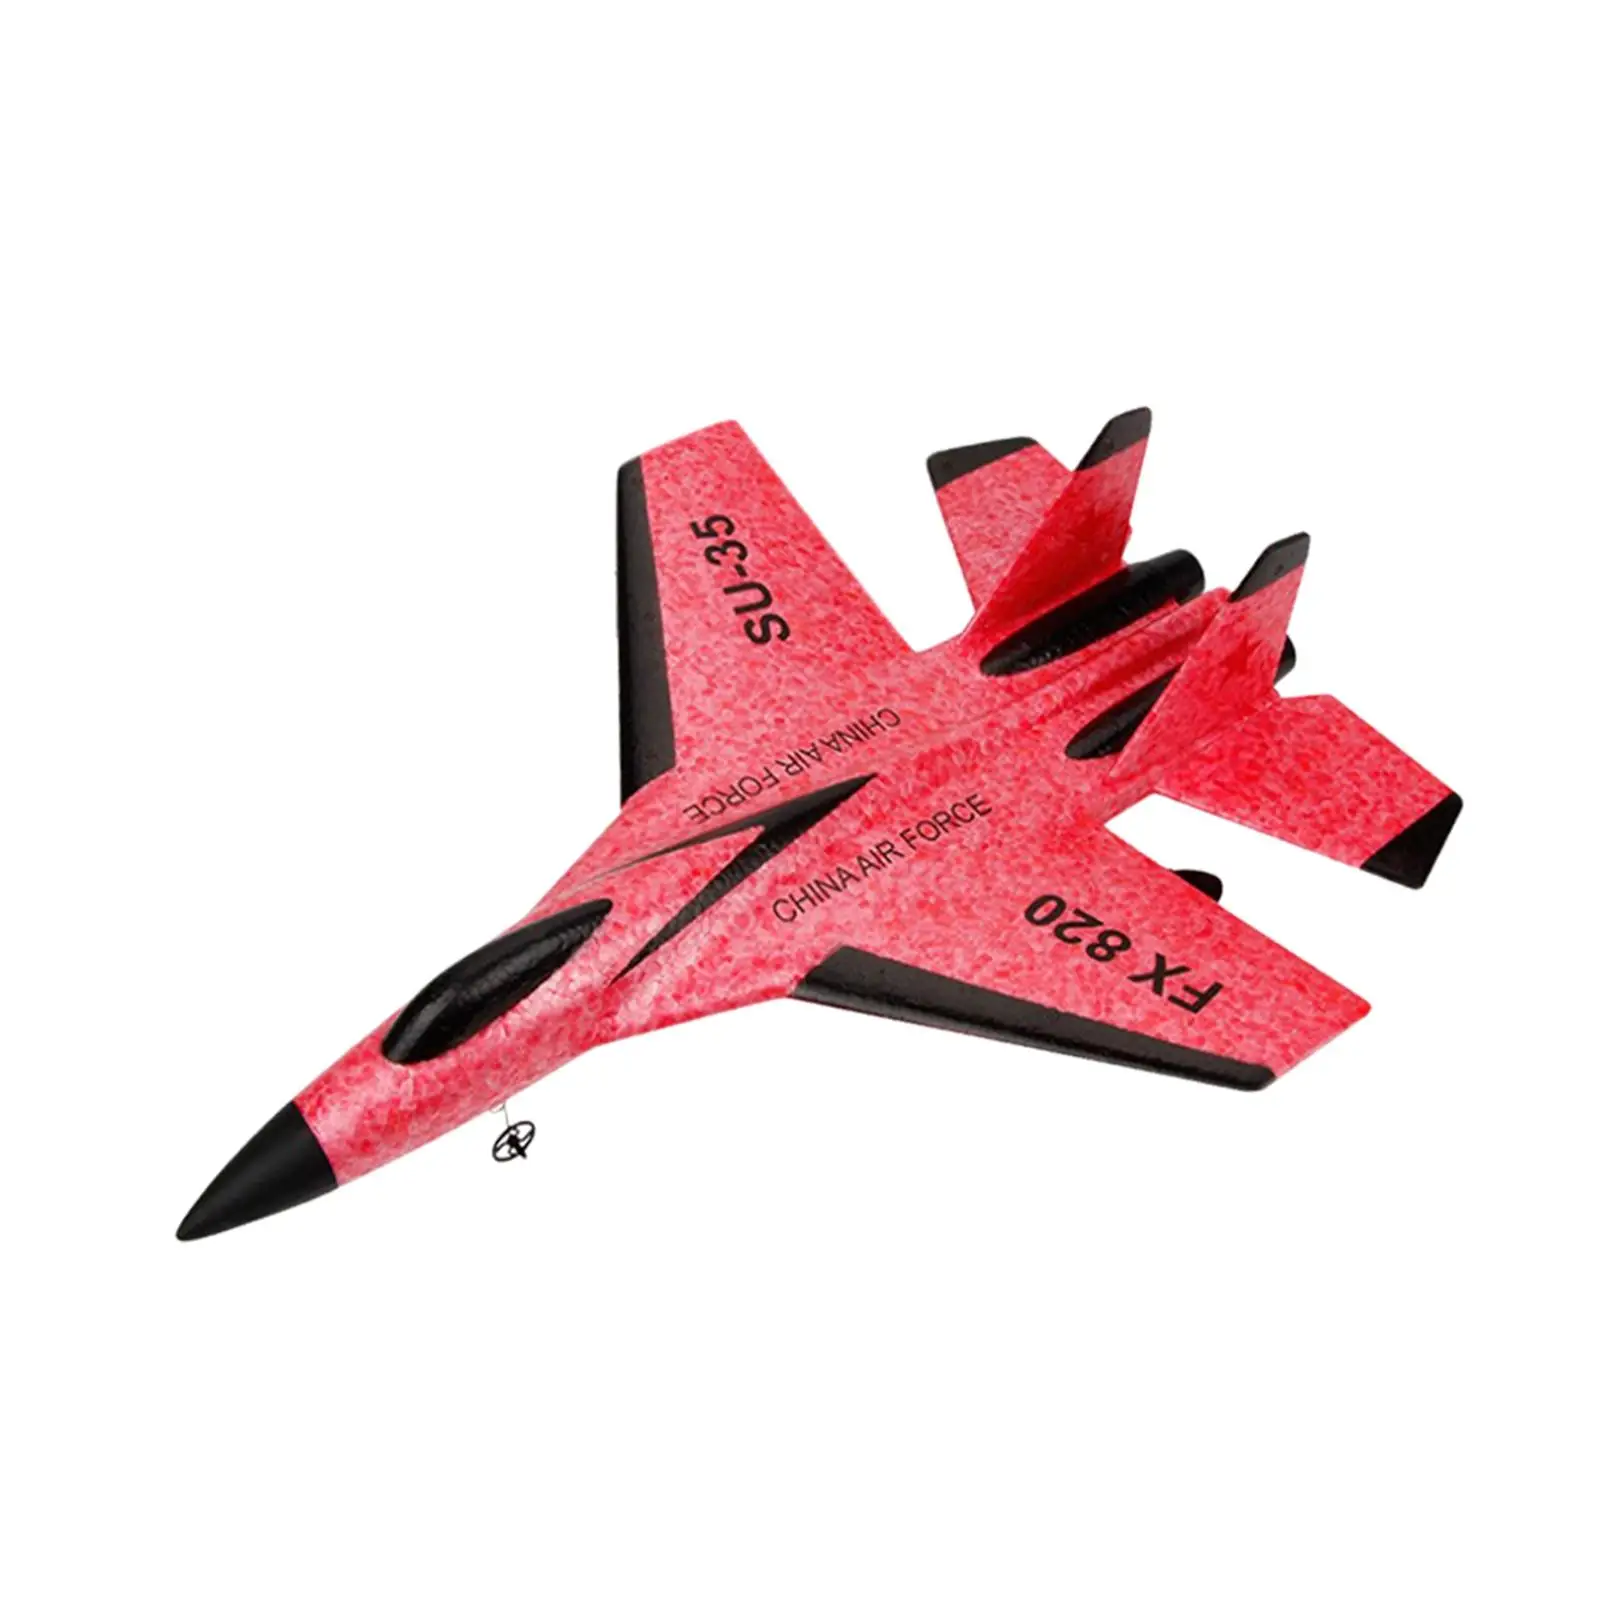 Remote Control Airplane Flying Model Glider Aircraft for Adult Kids Teens